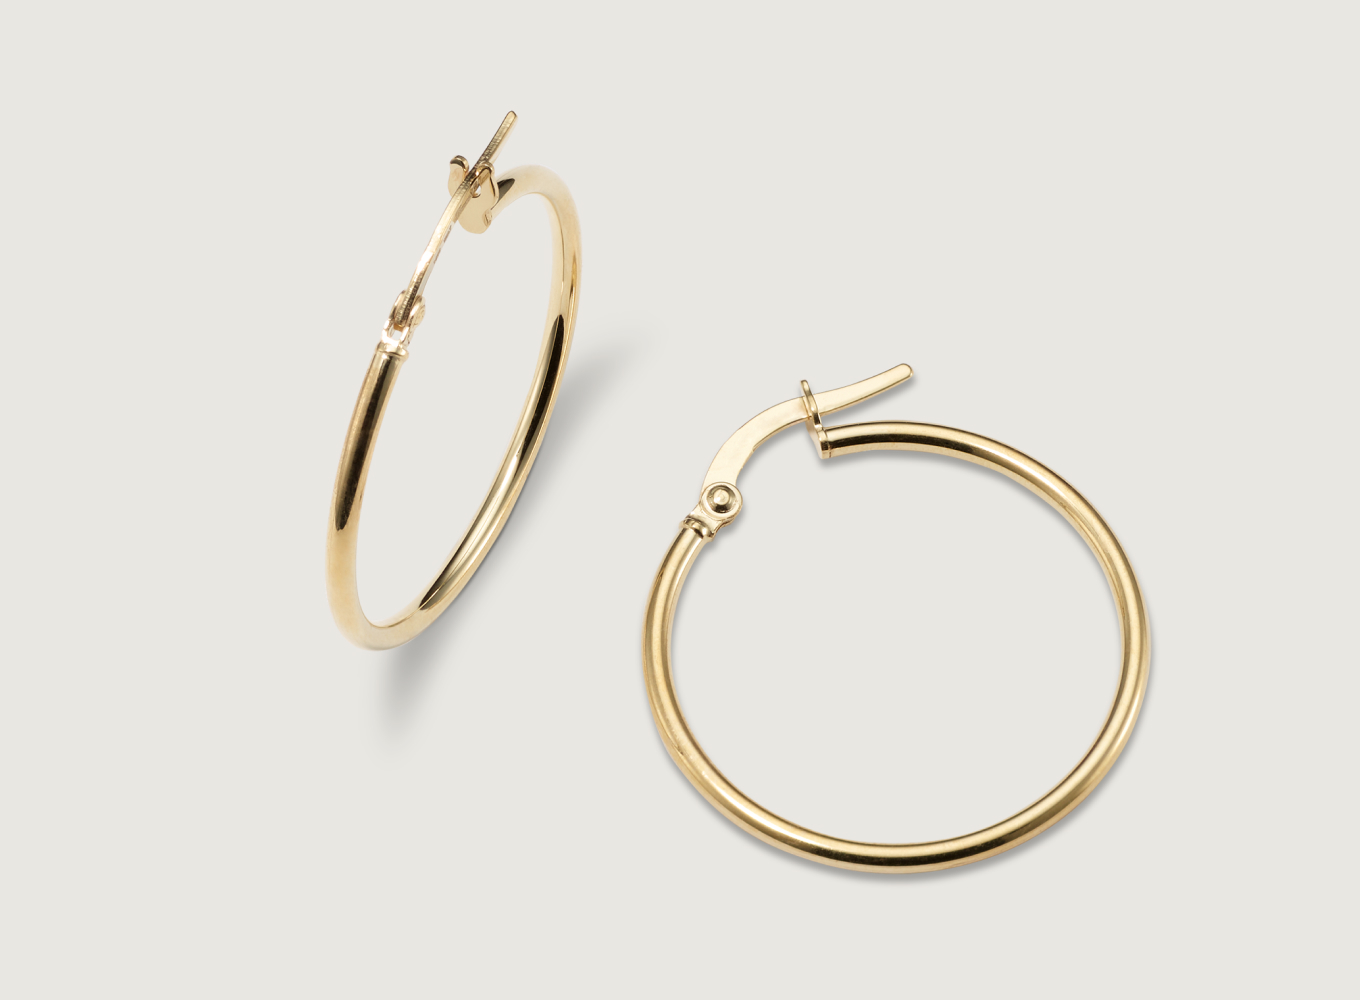 gold hoop earrings. Daily 14K Yellow Gold Hoops
These hoop earrings feature a classic look with a slim, rounded profile and a lightweight feel, making them perfect for daily wear. A lever back keeps these beautiful 14-karat yellow gold hoops secure.